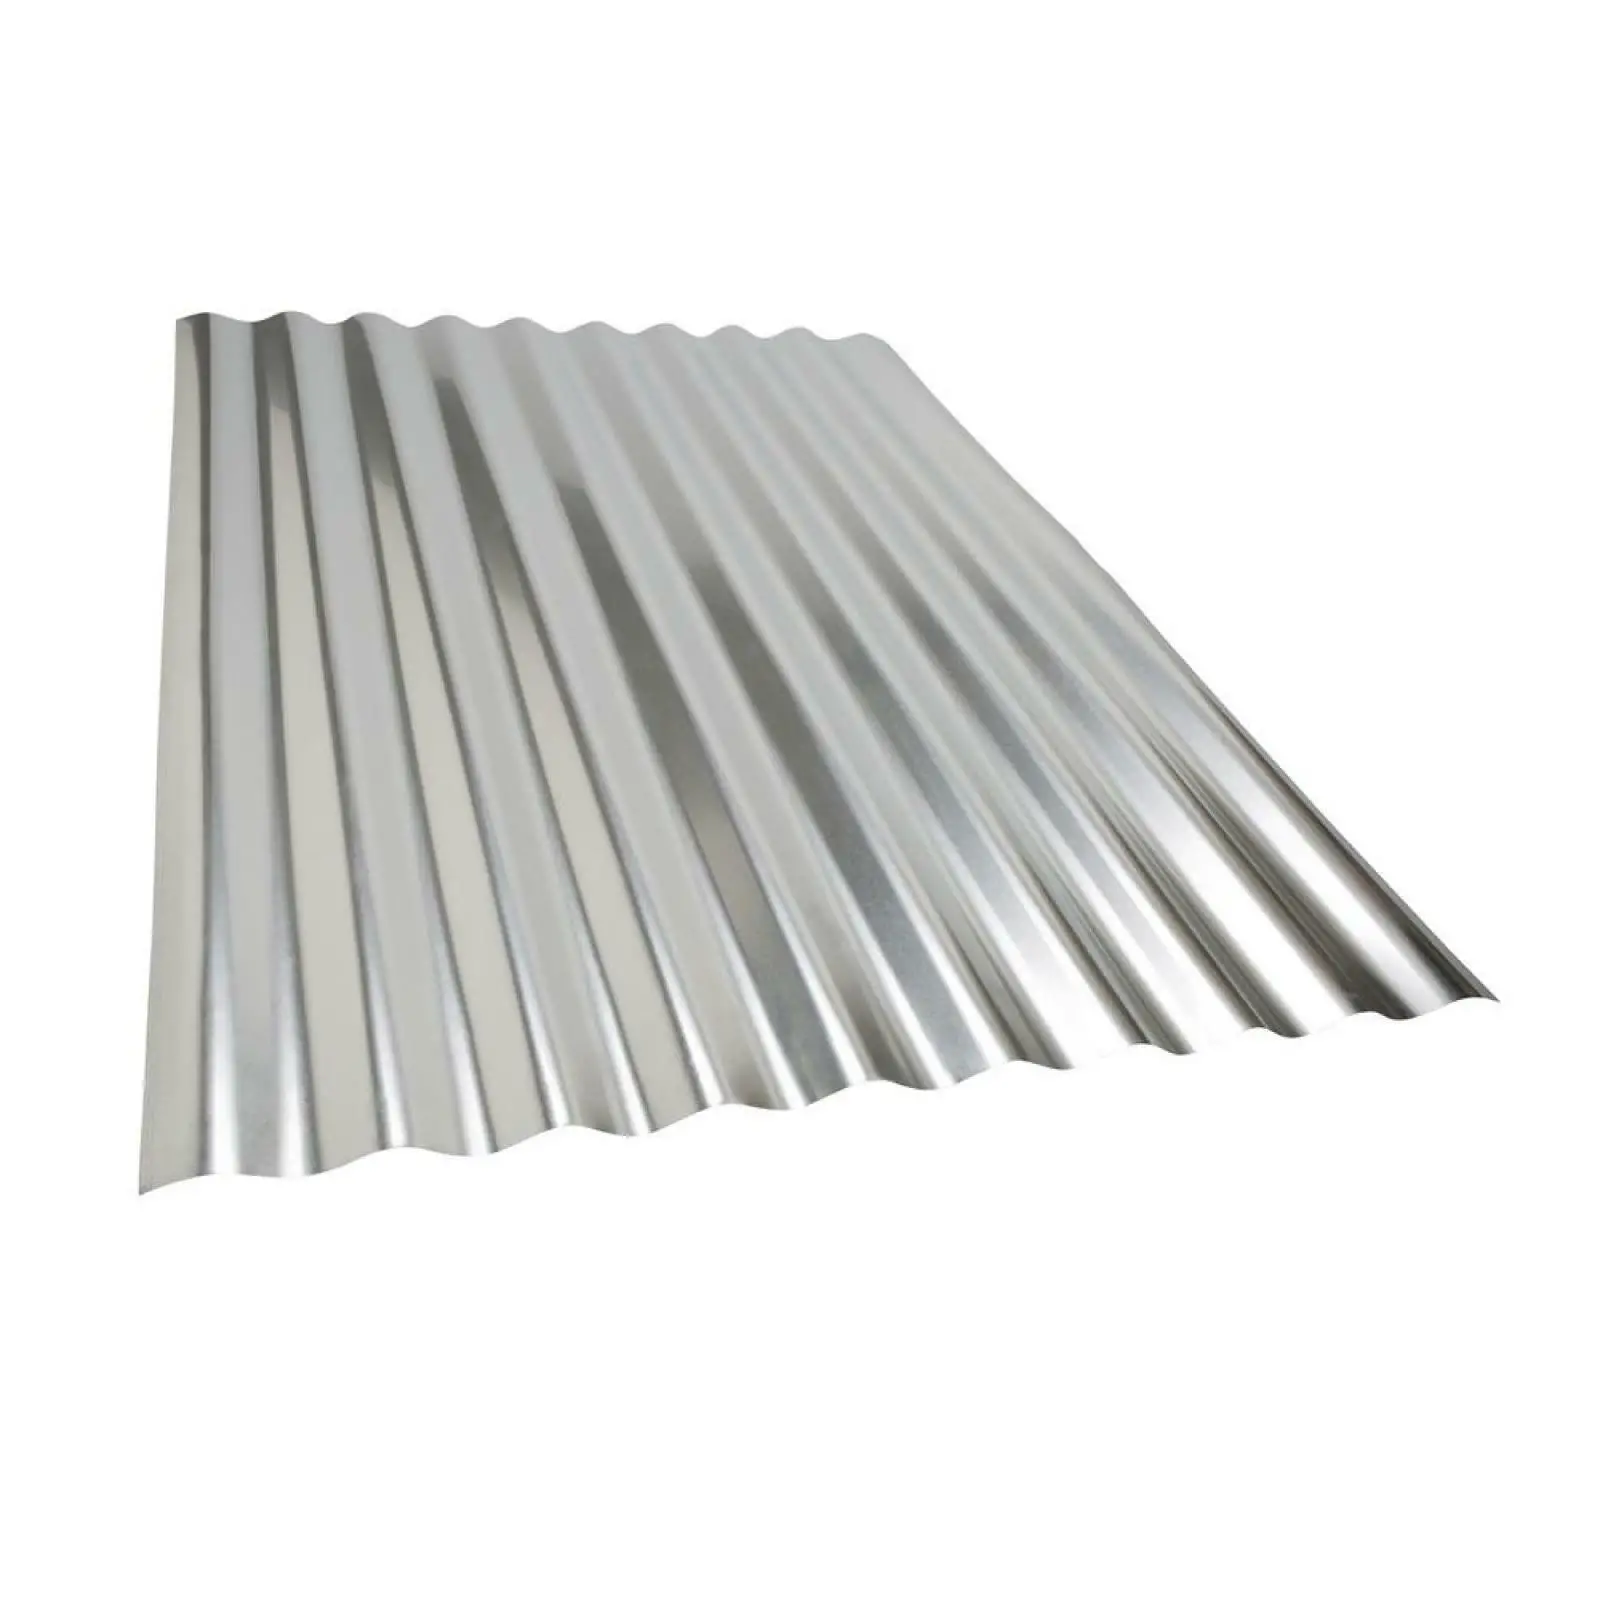 Project Panel Corrugated Galvanized Steel Roof Panel 36 X 27 in. 30 ...